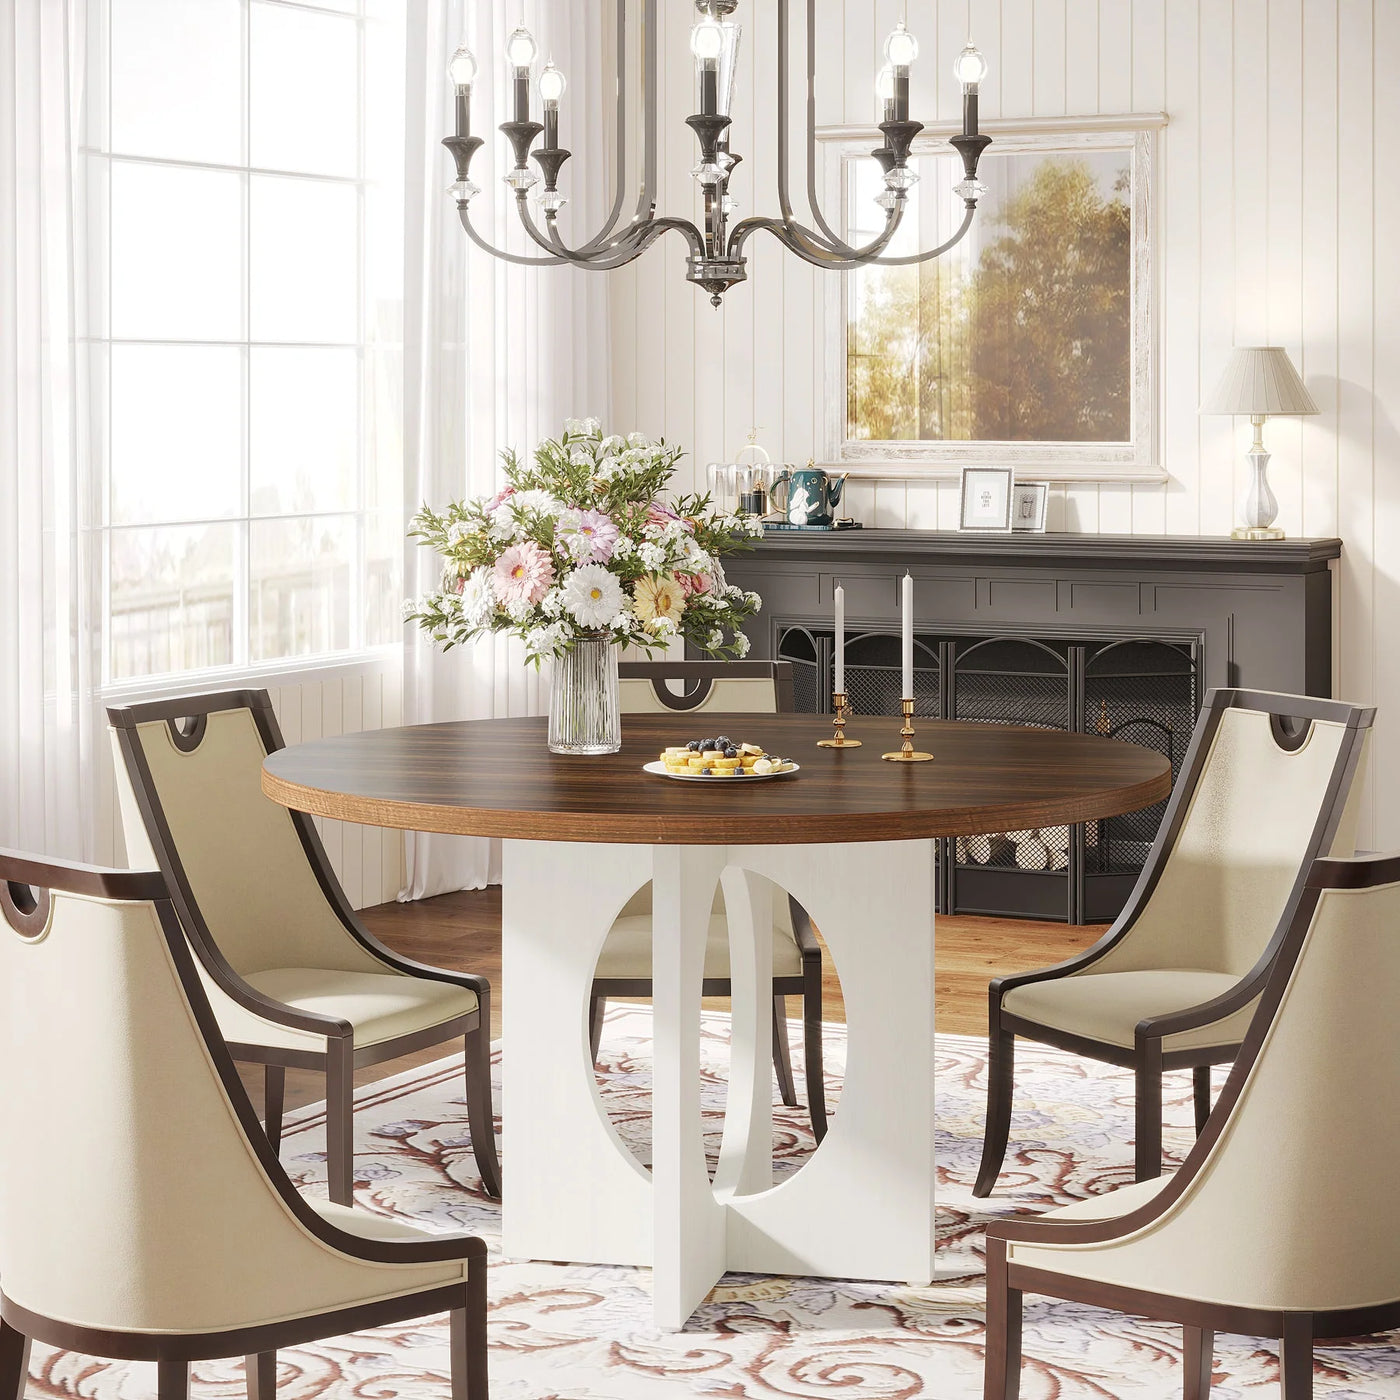 Fawn 47" Round Dining Table | Wood White Brown Farmhouse Kitchen Table for 4-6 People